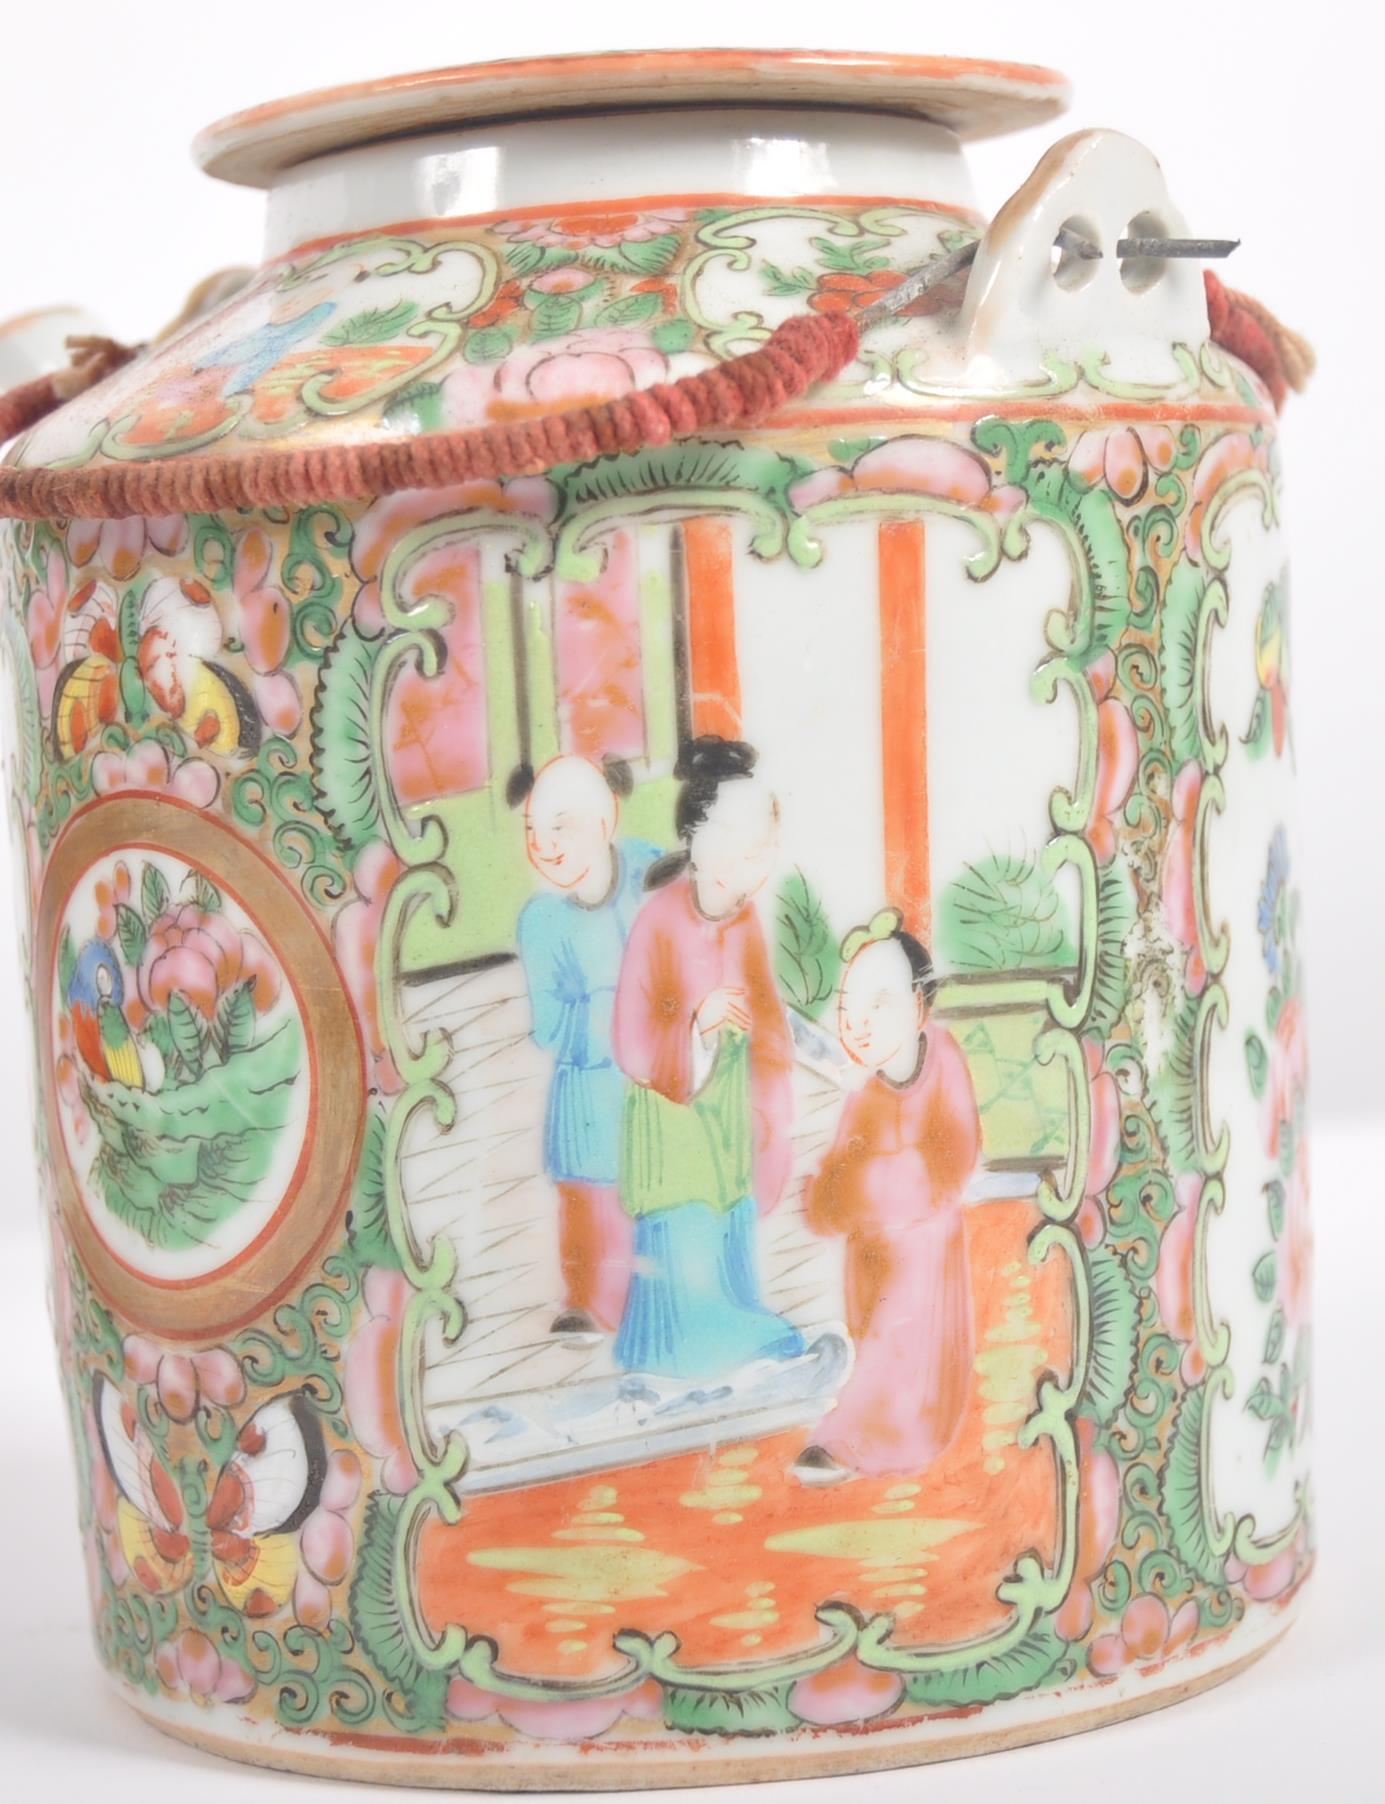 CHINESE FAMILLE ROSE TEAPOT IN WICKER CASE - Image 4 of 13